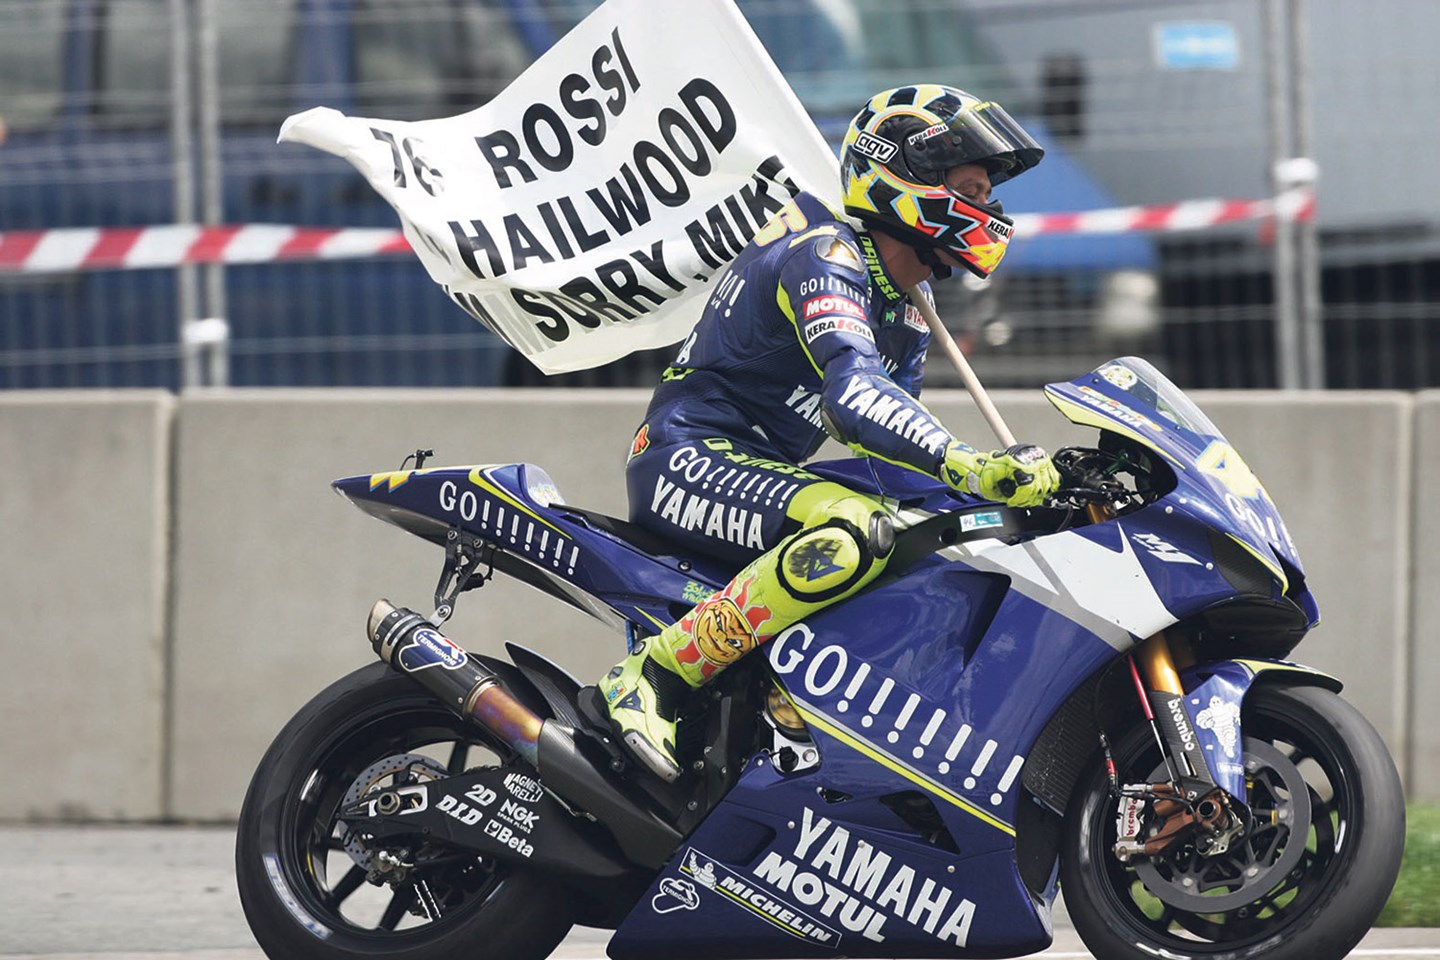 Valentino Rossi: How the GOAT defined MotoGP with 26 seasons of